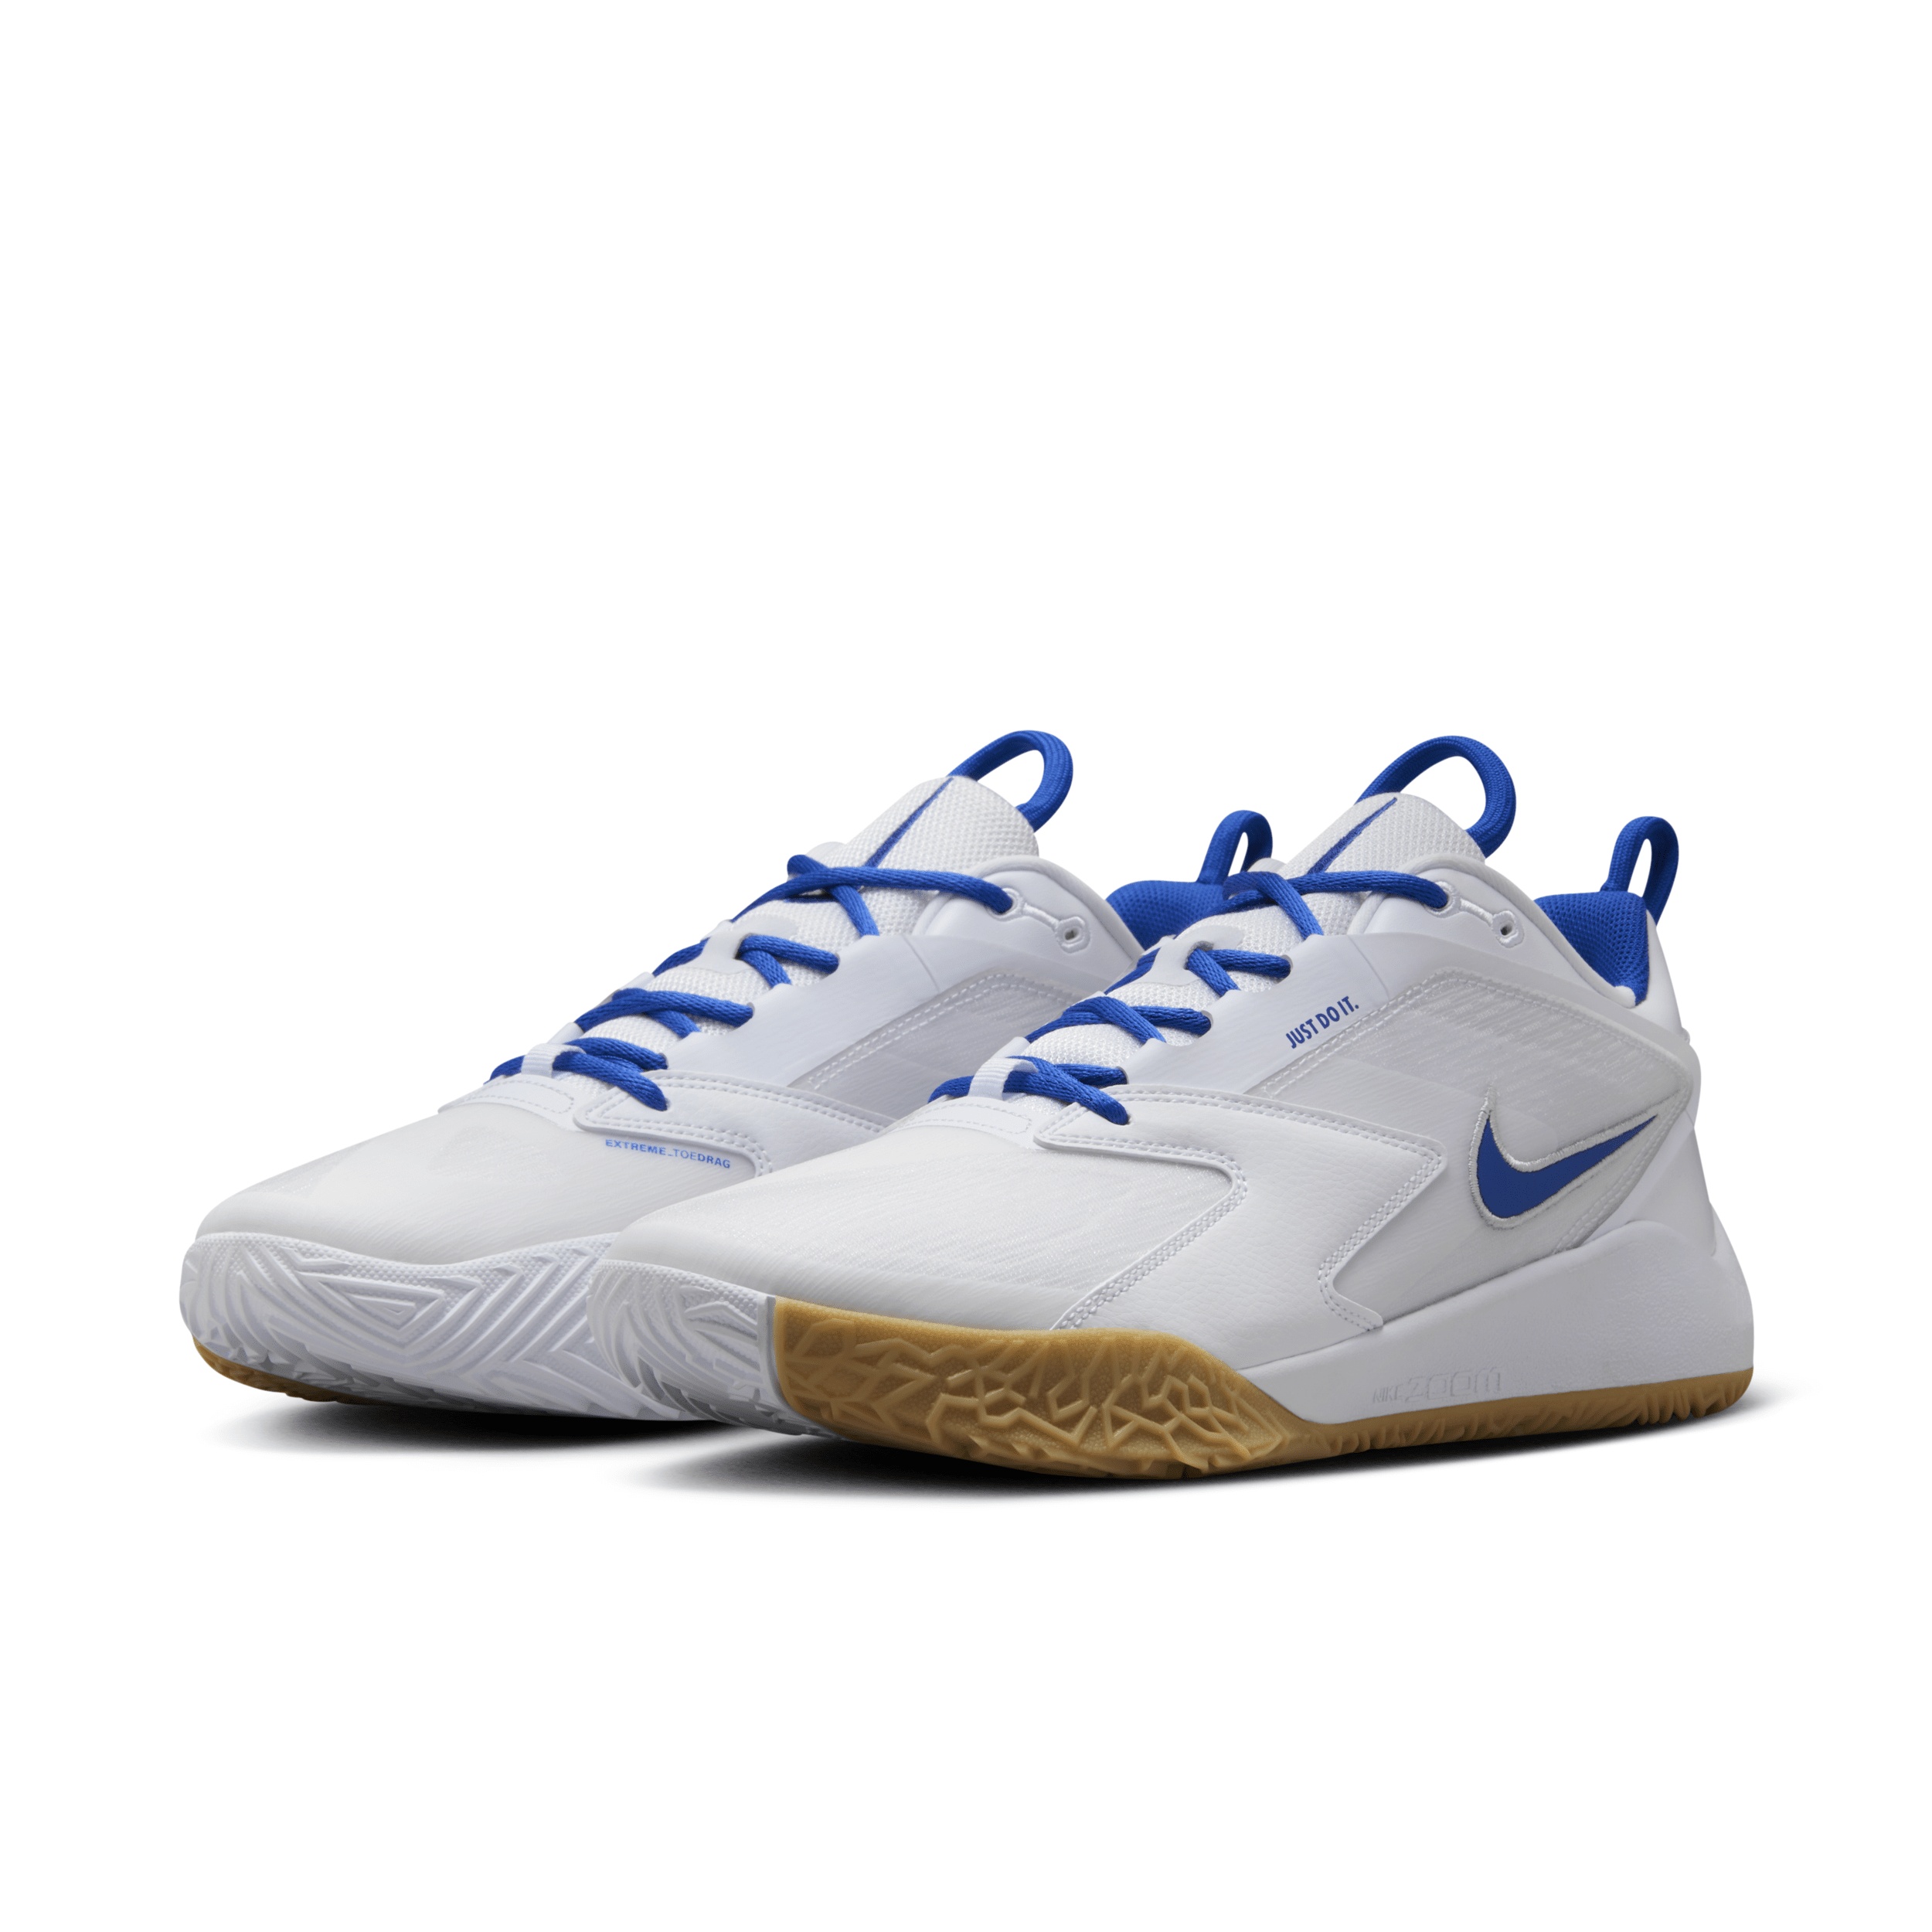 Nike Unisex HyperAce 3 Volleyball Shoes - 5